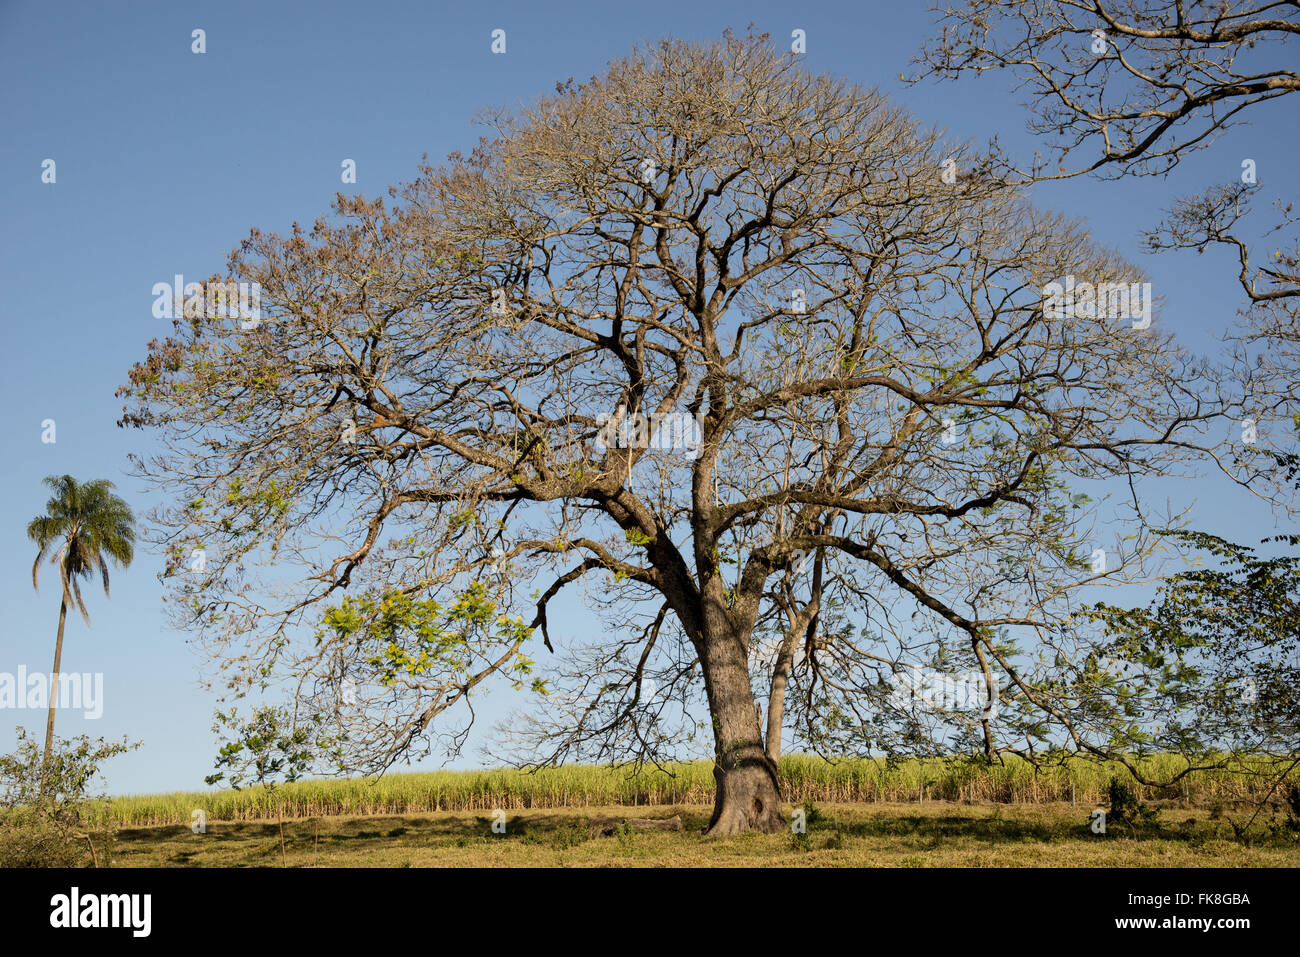 Jatoba remnant of forest into pasture to plantation of sugar cane in the background Stock Photo